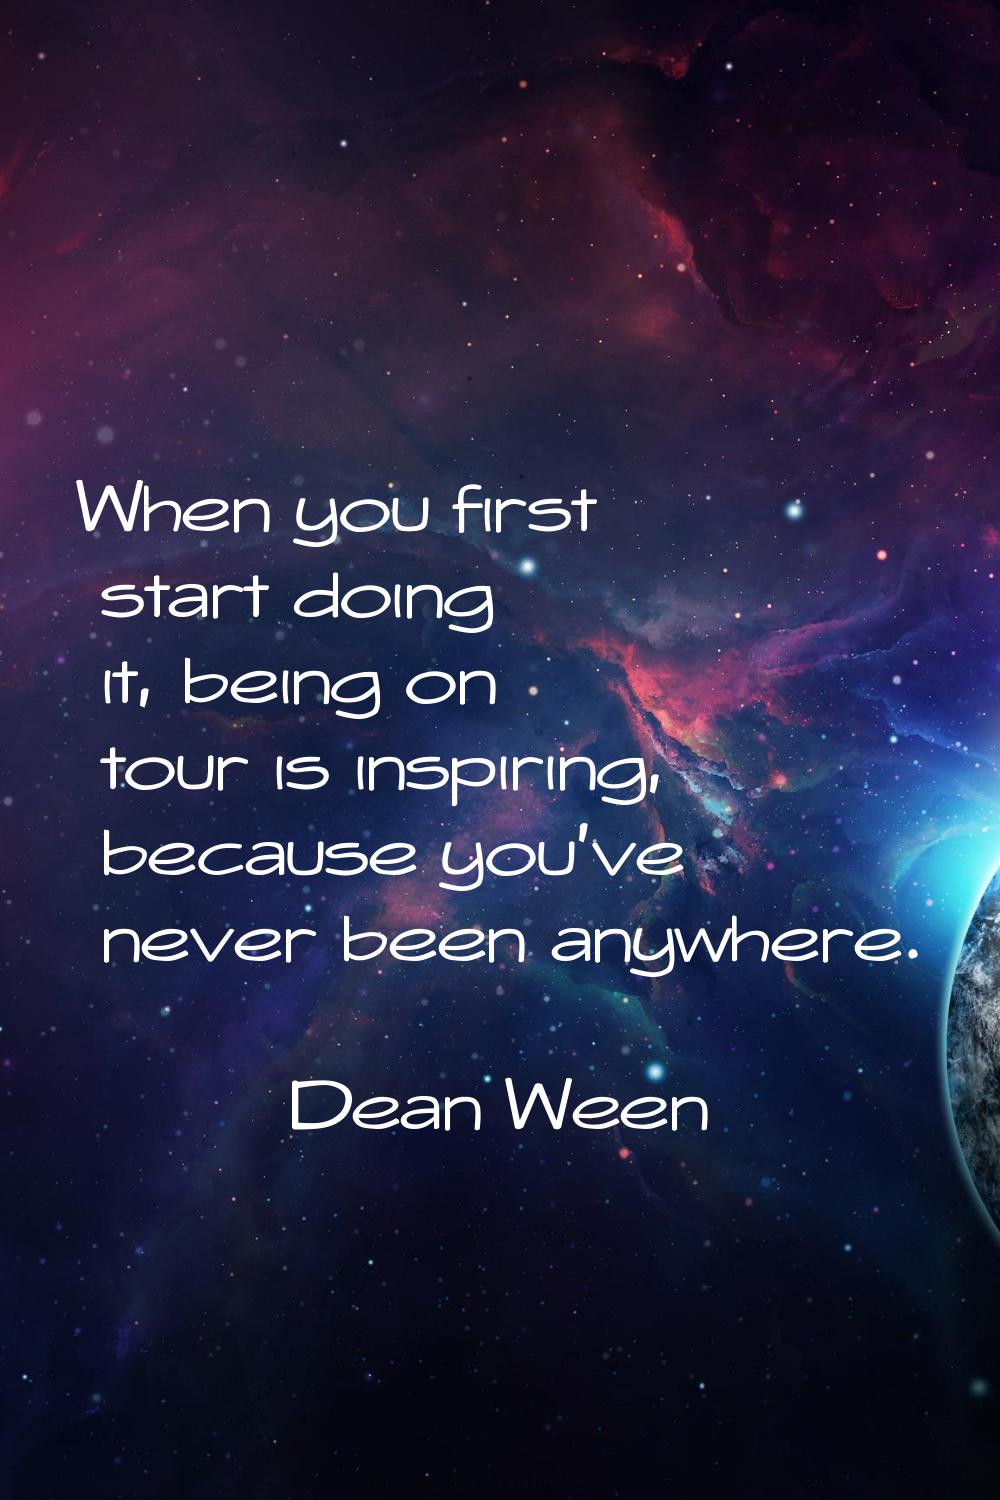 When you first start doing it, being on tour is inspiring, because you've never been anywhere.